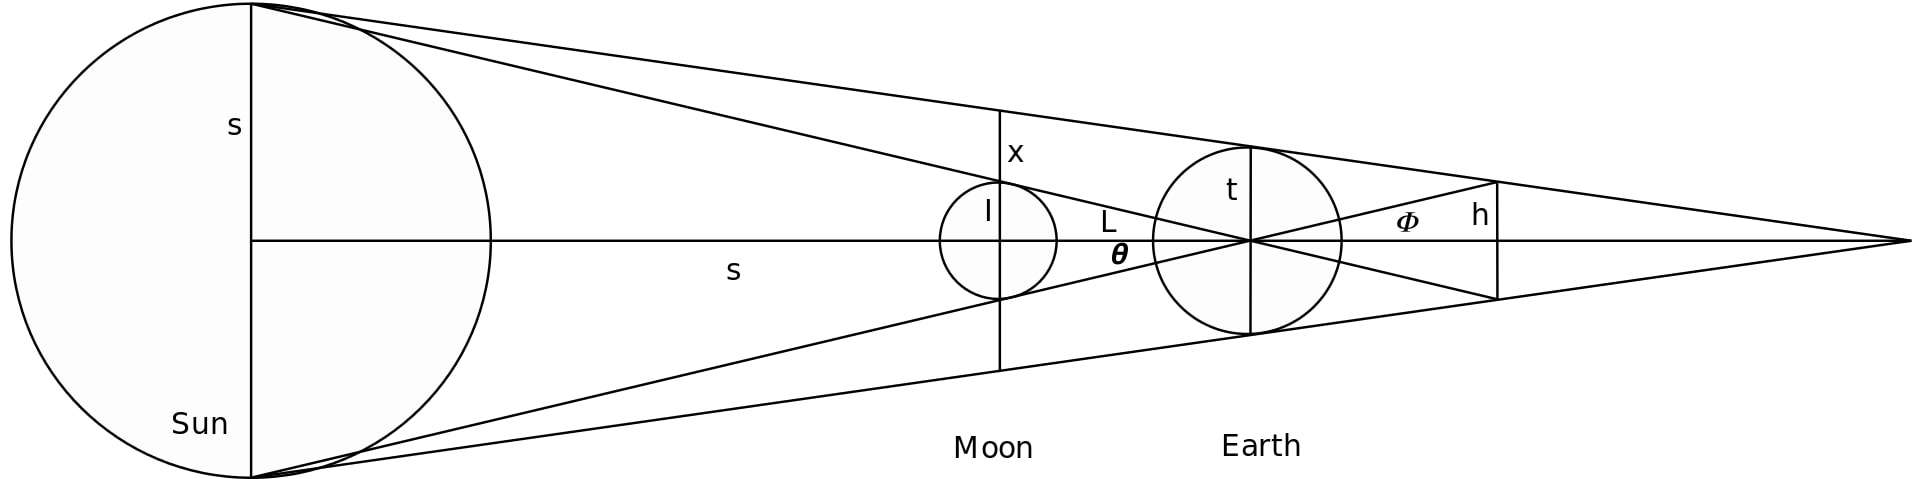 Geometric construction used by Hipparchus in his determination of the distances to the Sun and Moon